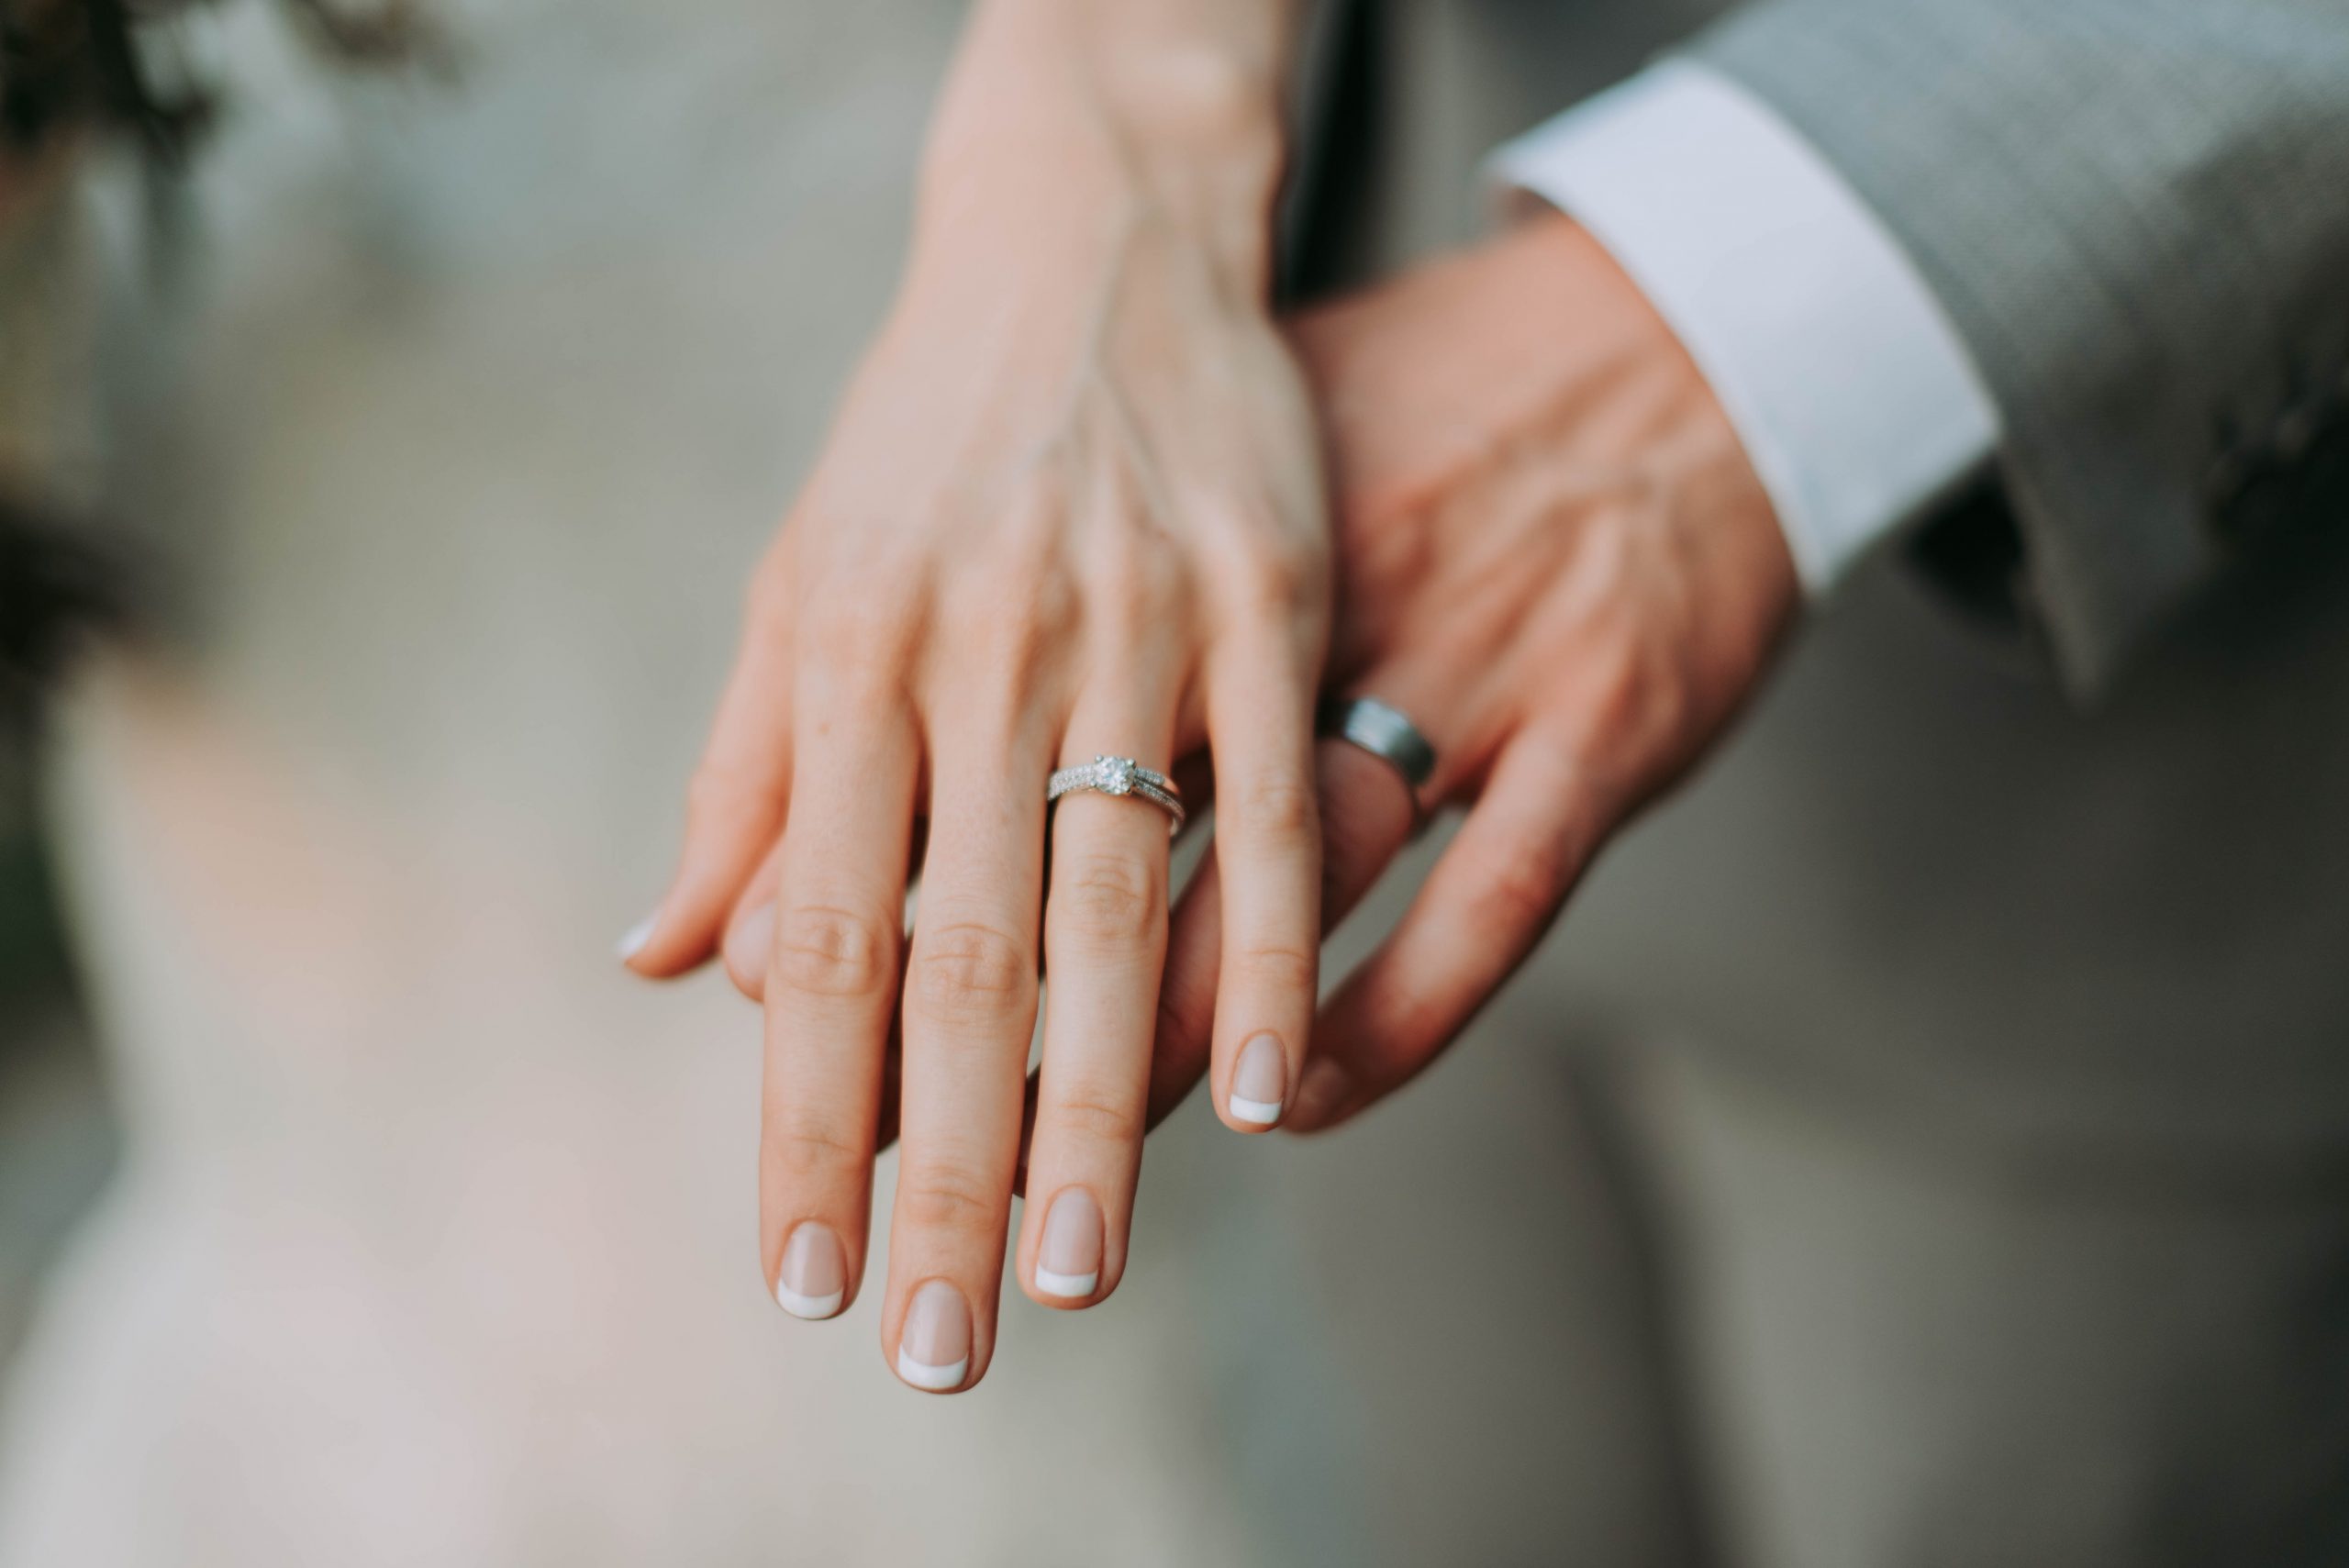 a close-up of a wedding ring being held by a hand